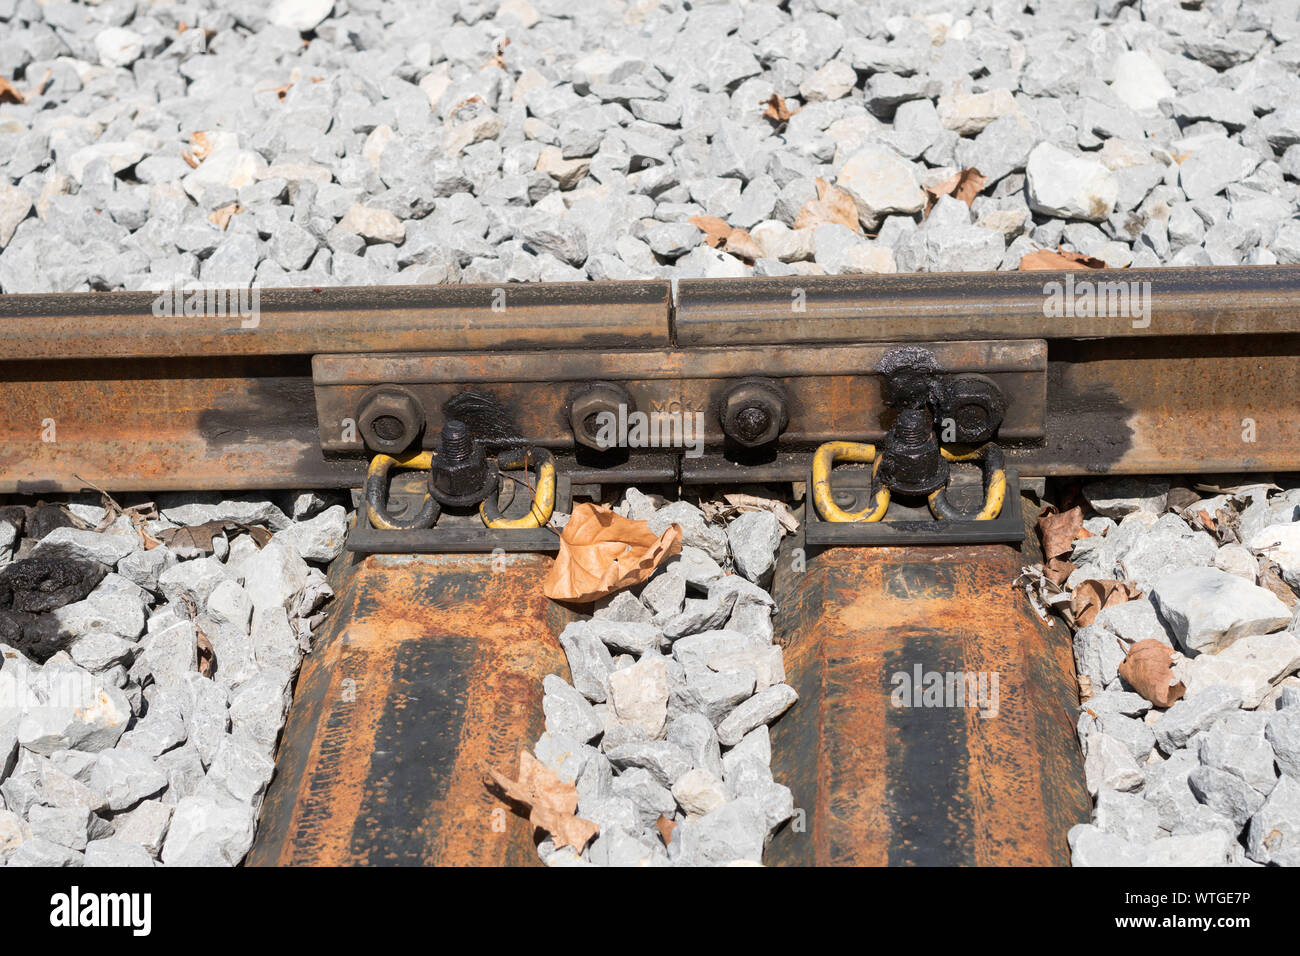 Rail joint with 4 bolt fishplate and elastic railway clips over metal sleepers on metre gauge railway in France, Europe Stock Photo